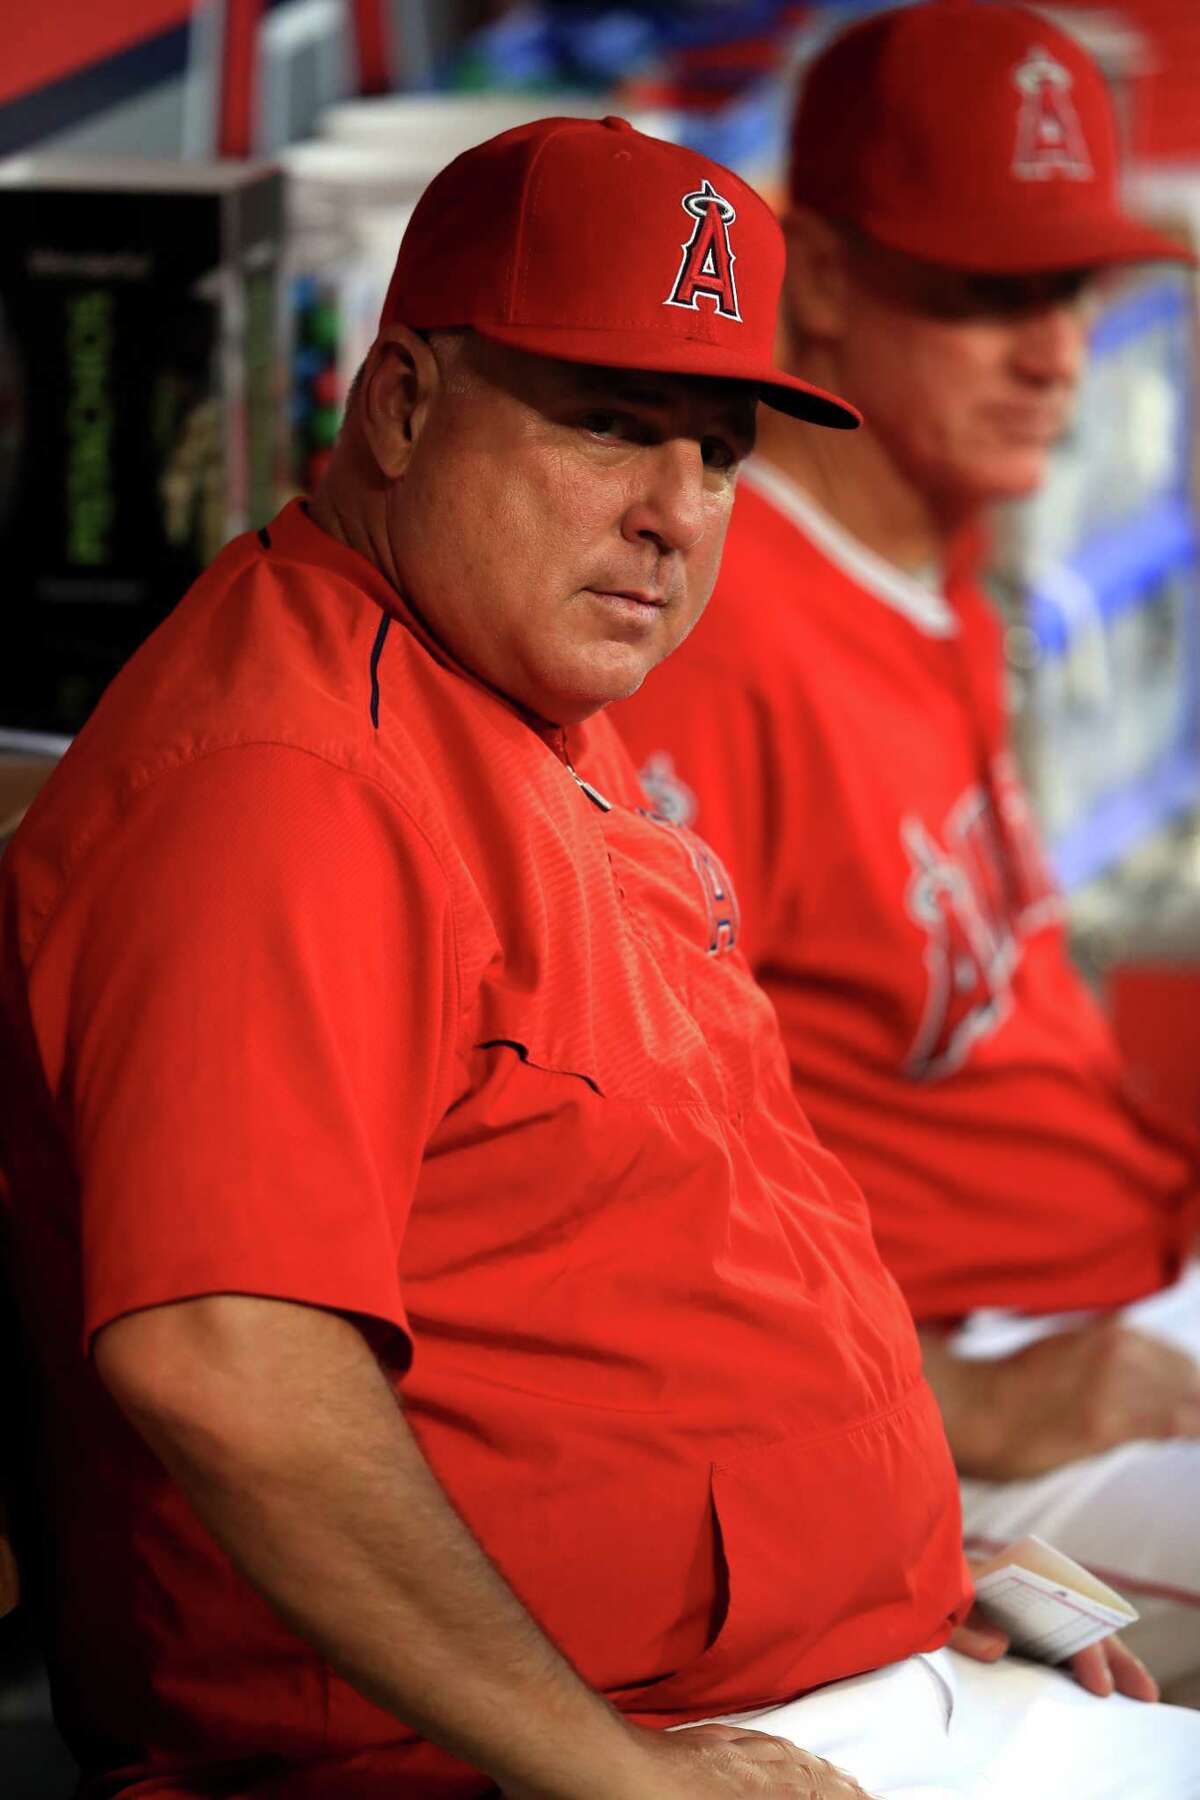 ANAHEIM, CA - SEPTEMBER 12: Manager Mike Scioscia of the Los Angeles Angels of Anaheim looks on from the dugout during the first inning of a game against the Houston Astros at Angel Stadium of Anaheim on September 12, 2017 in Anaheim, California.